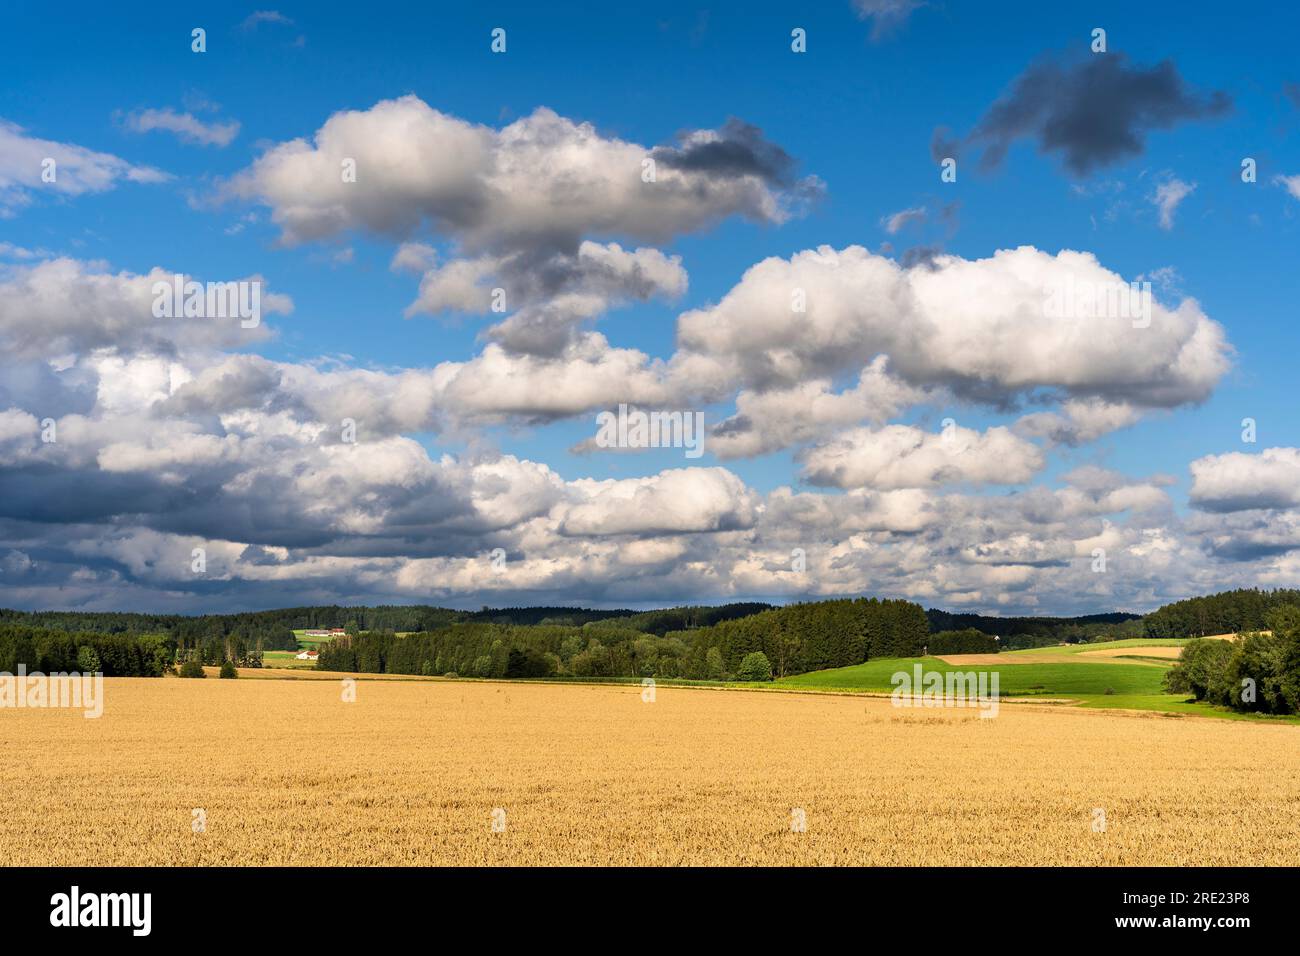 Bavarian landscape in the Upper Palatinate. A grainfield in front and farms in the background. Germany. Stock Photo